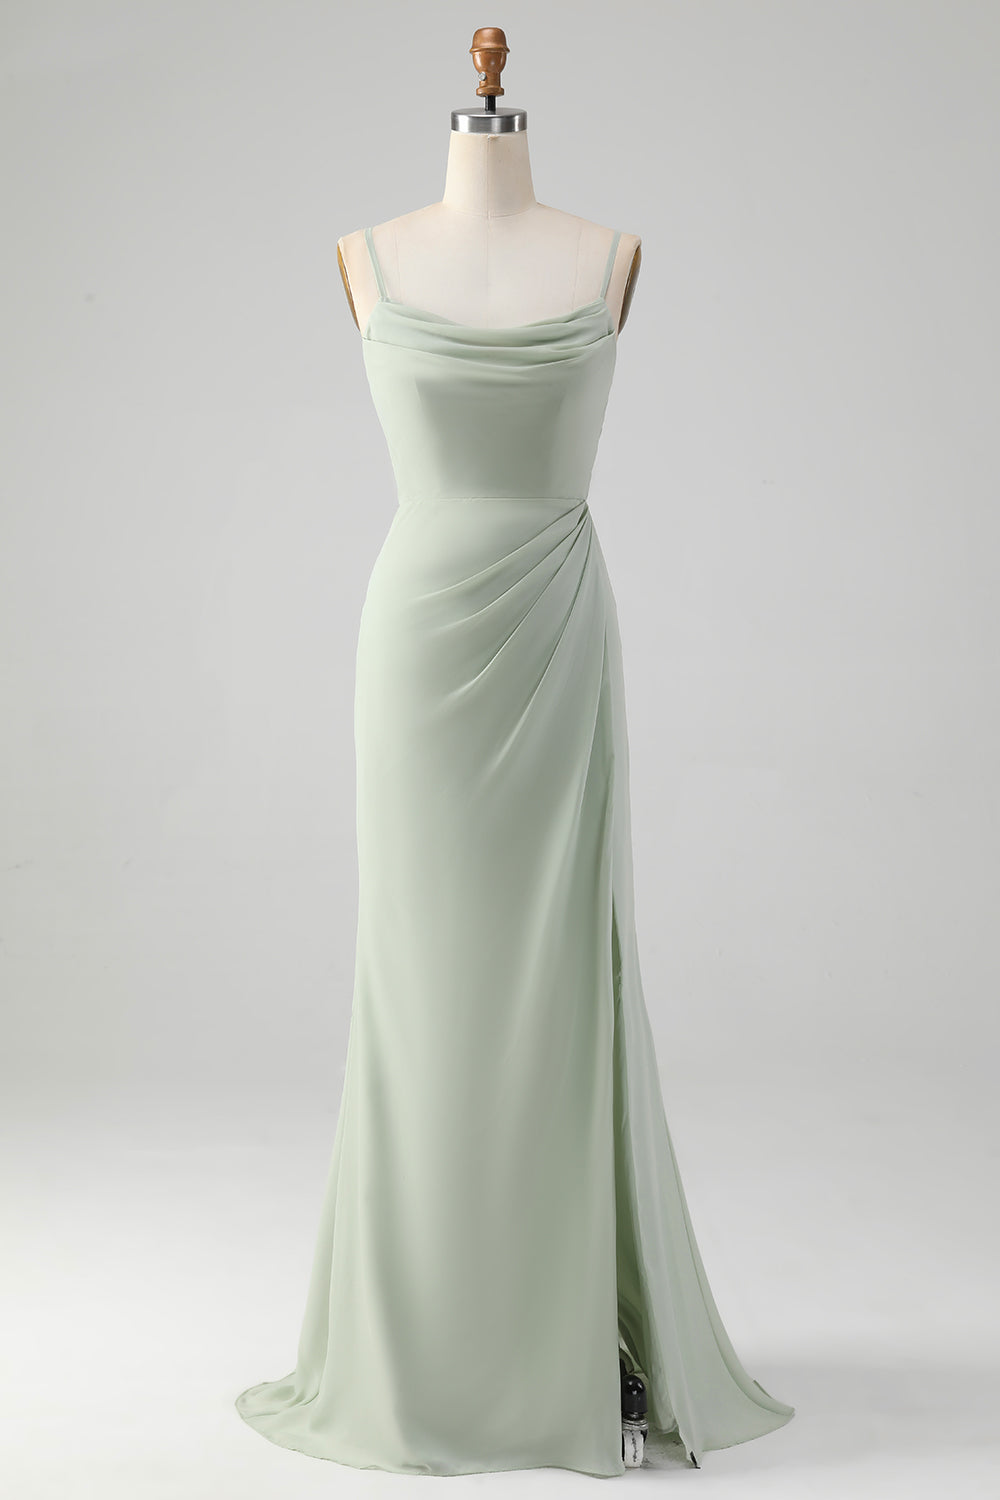 Matcha Cowl Neck Long Bridesmaid Dress with Lace Up Back